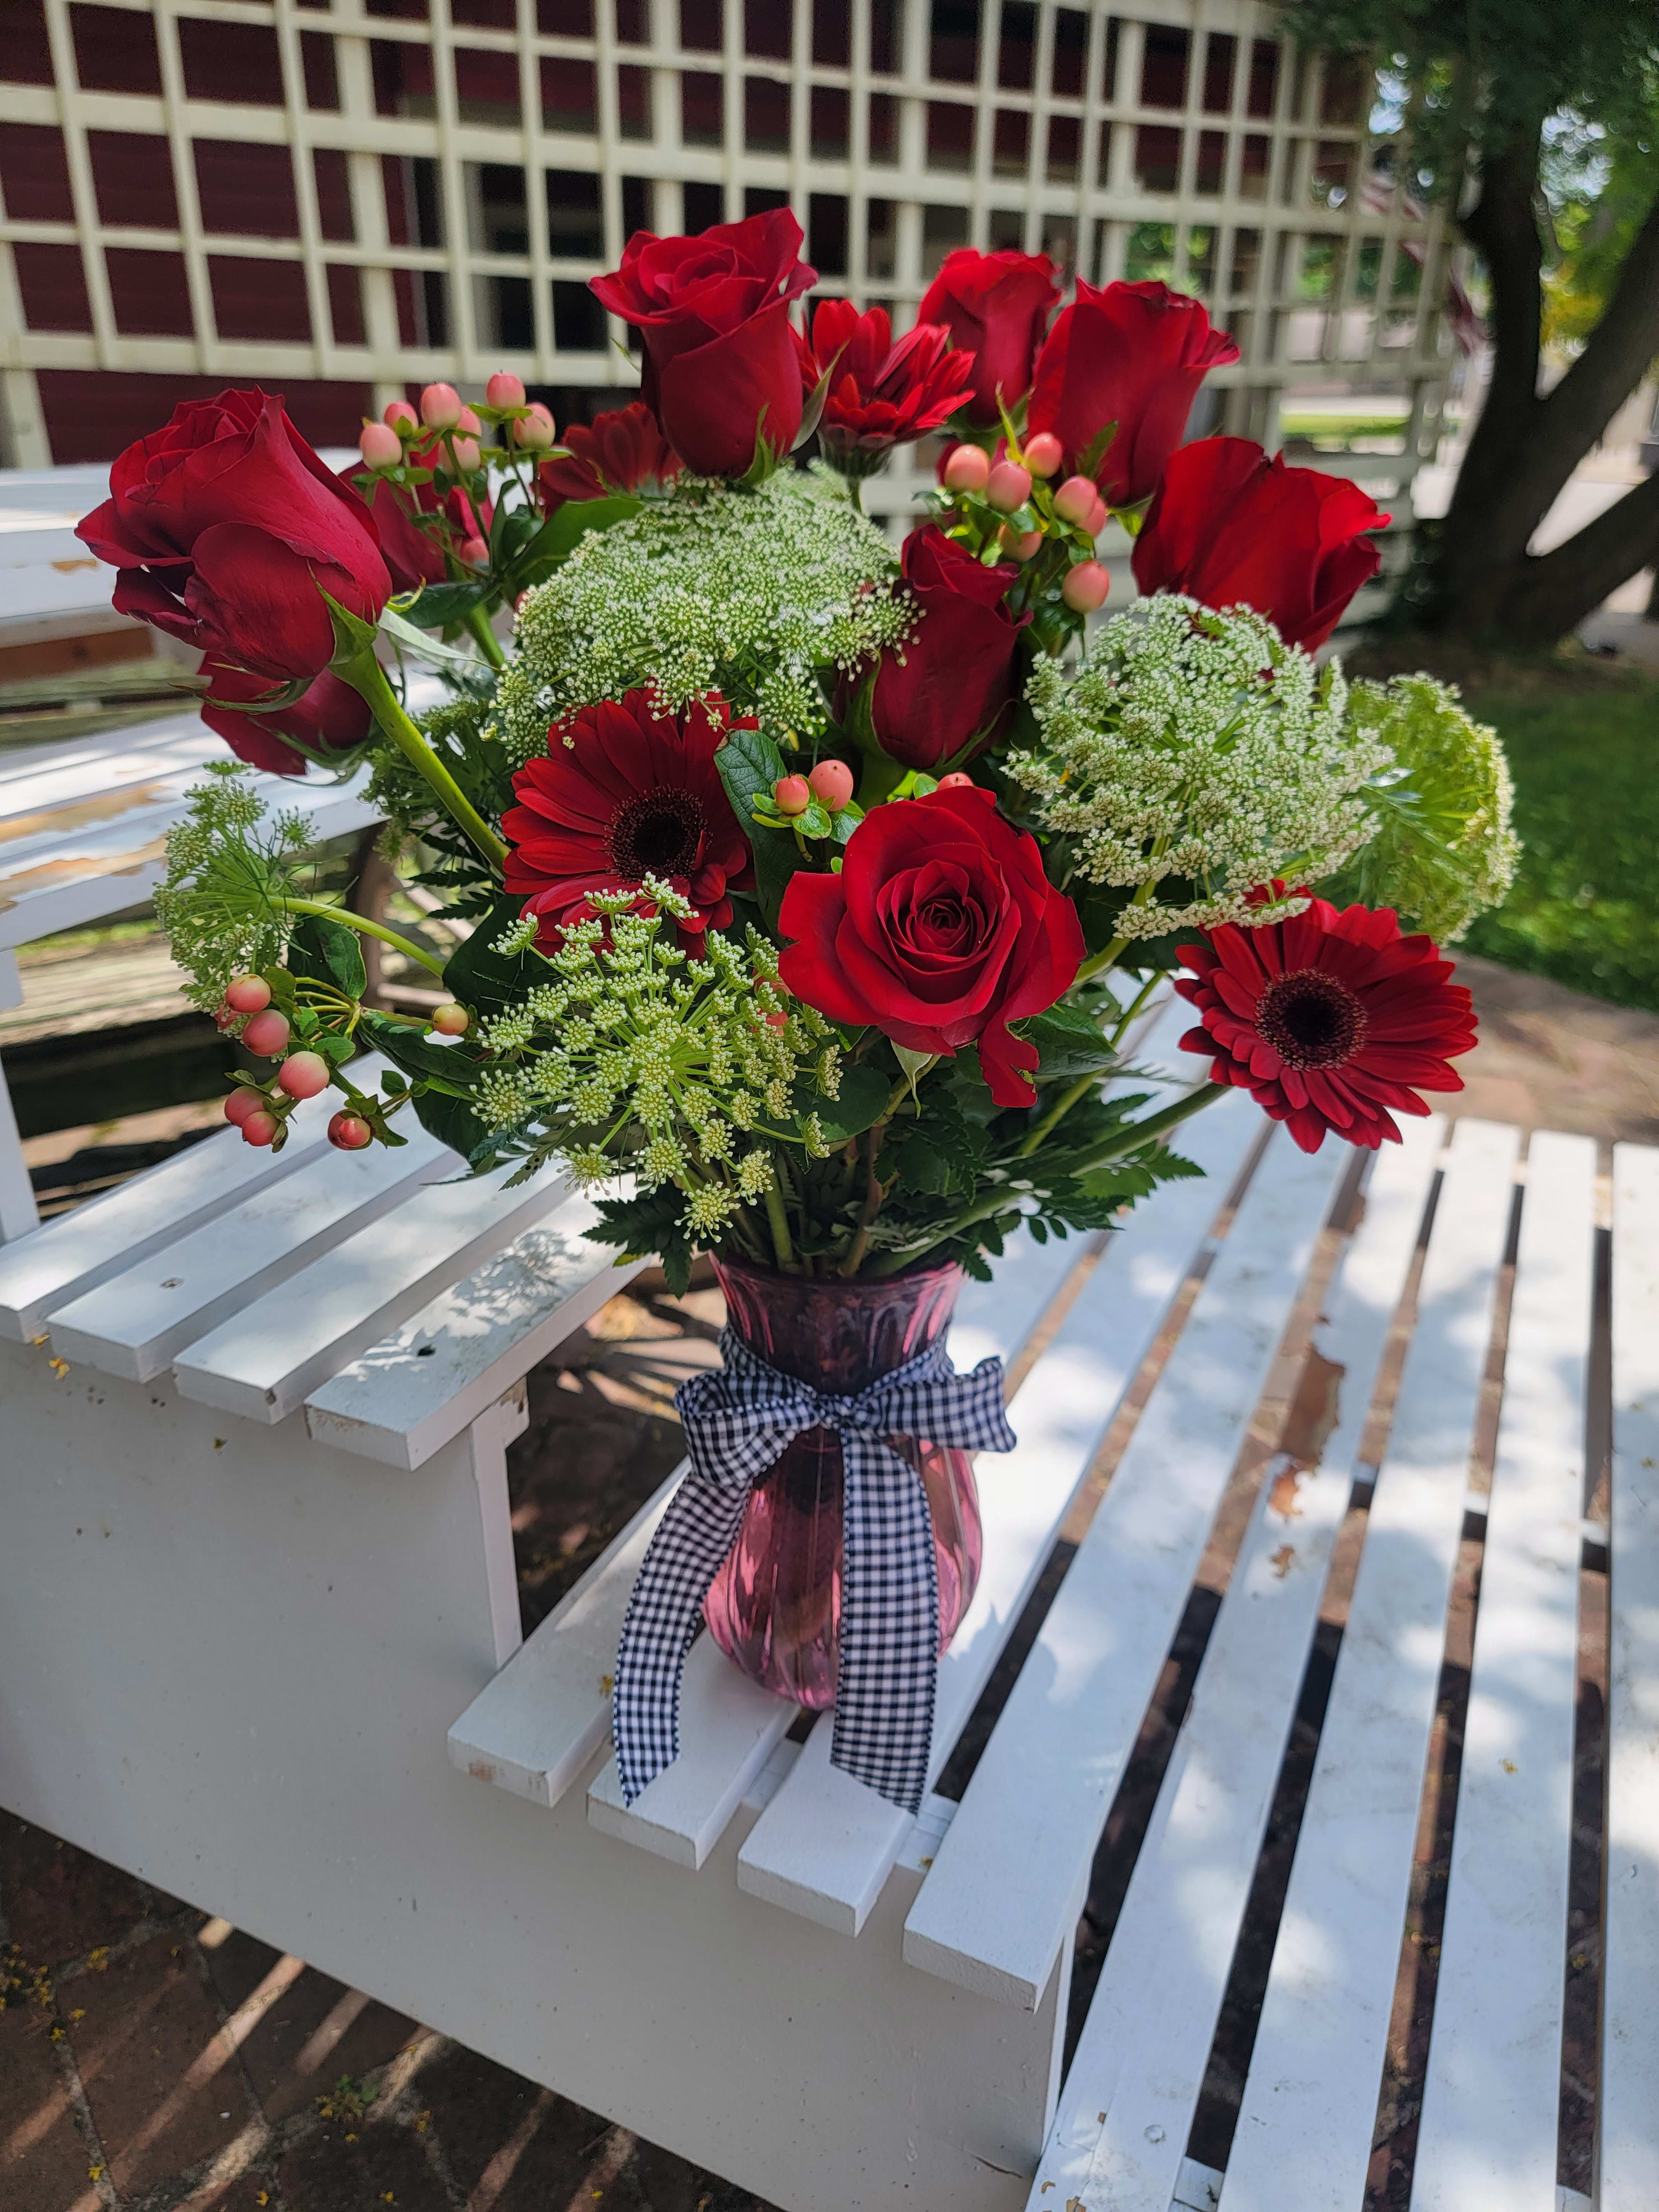 Ruby Slipper - An absolute stunning arrangement custom created for your special recipient. Ruby Slipper includes red roses, red gerbers, wax flower filler and queen ann's lace. 